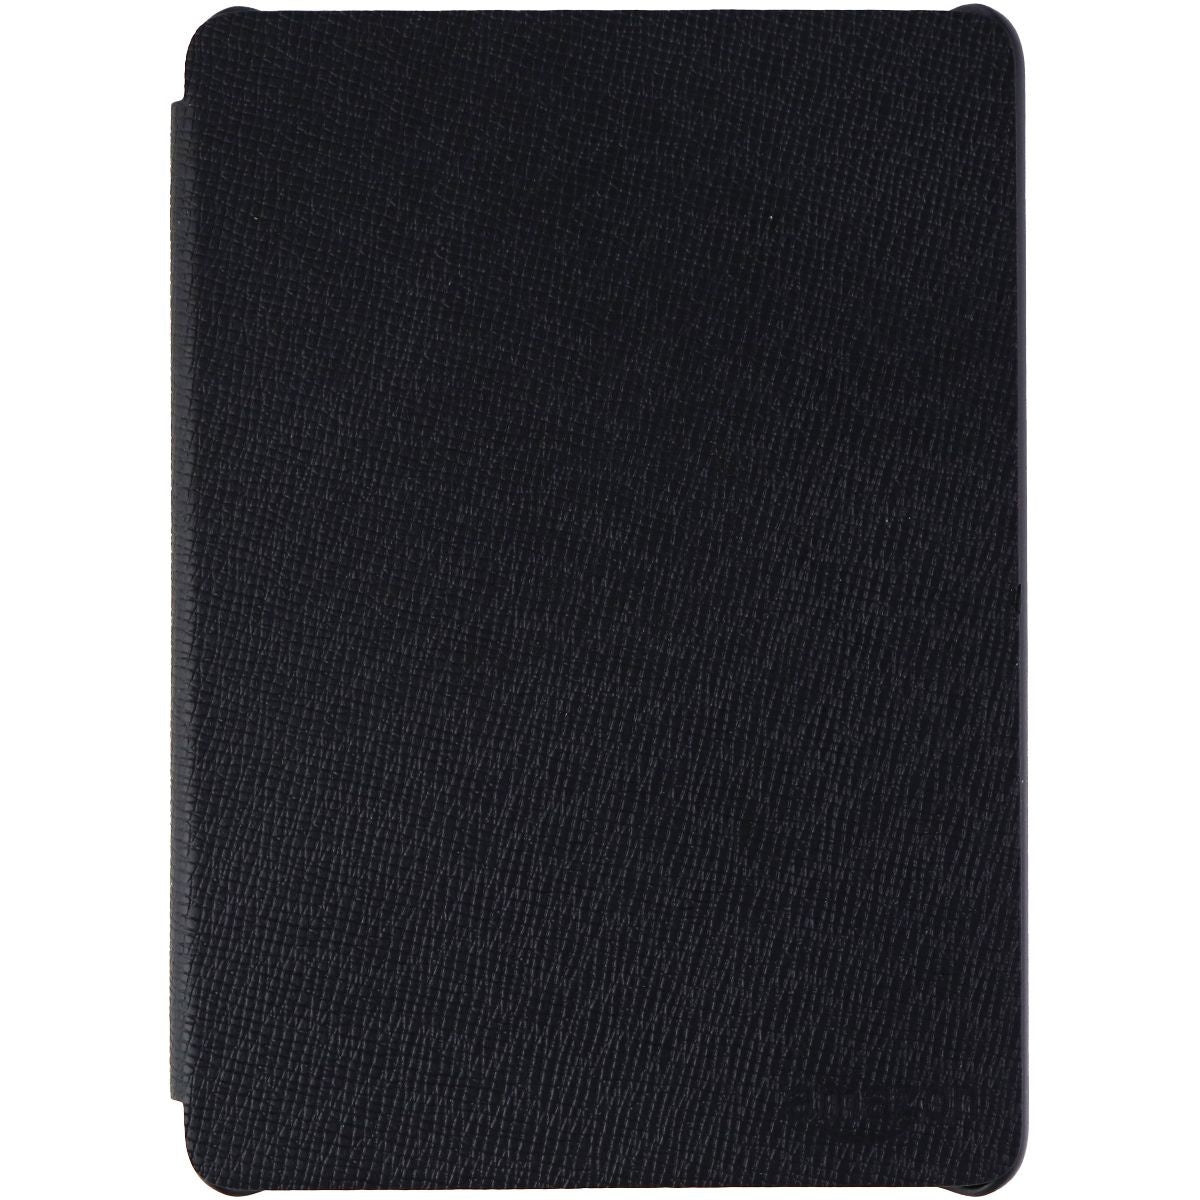 Kindle Paperwhite Leather Cover (10th Generation-2018) - Black leather